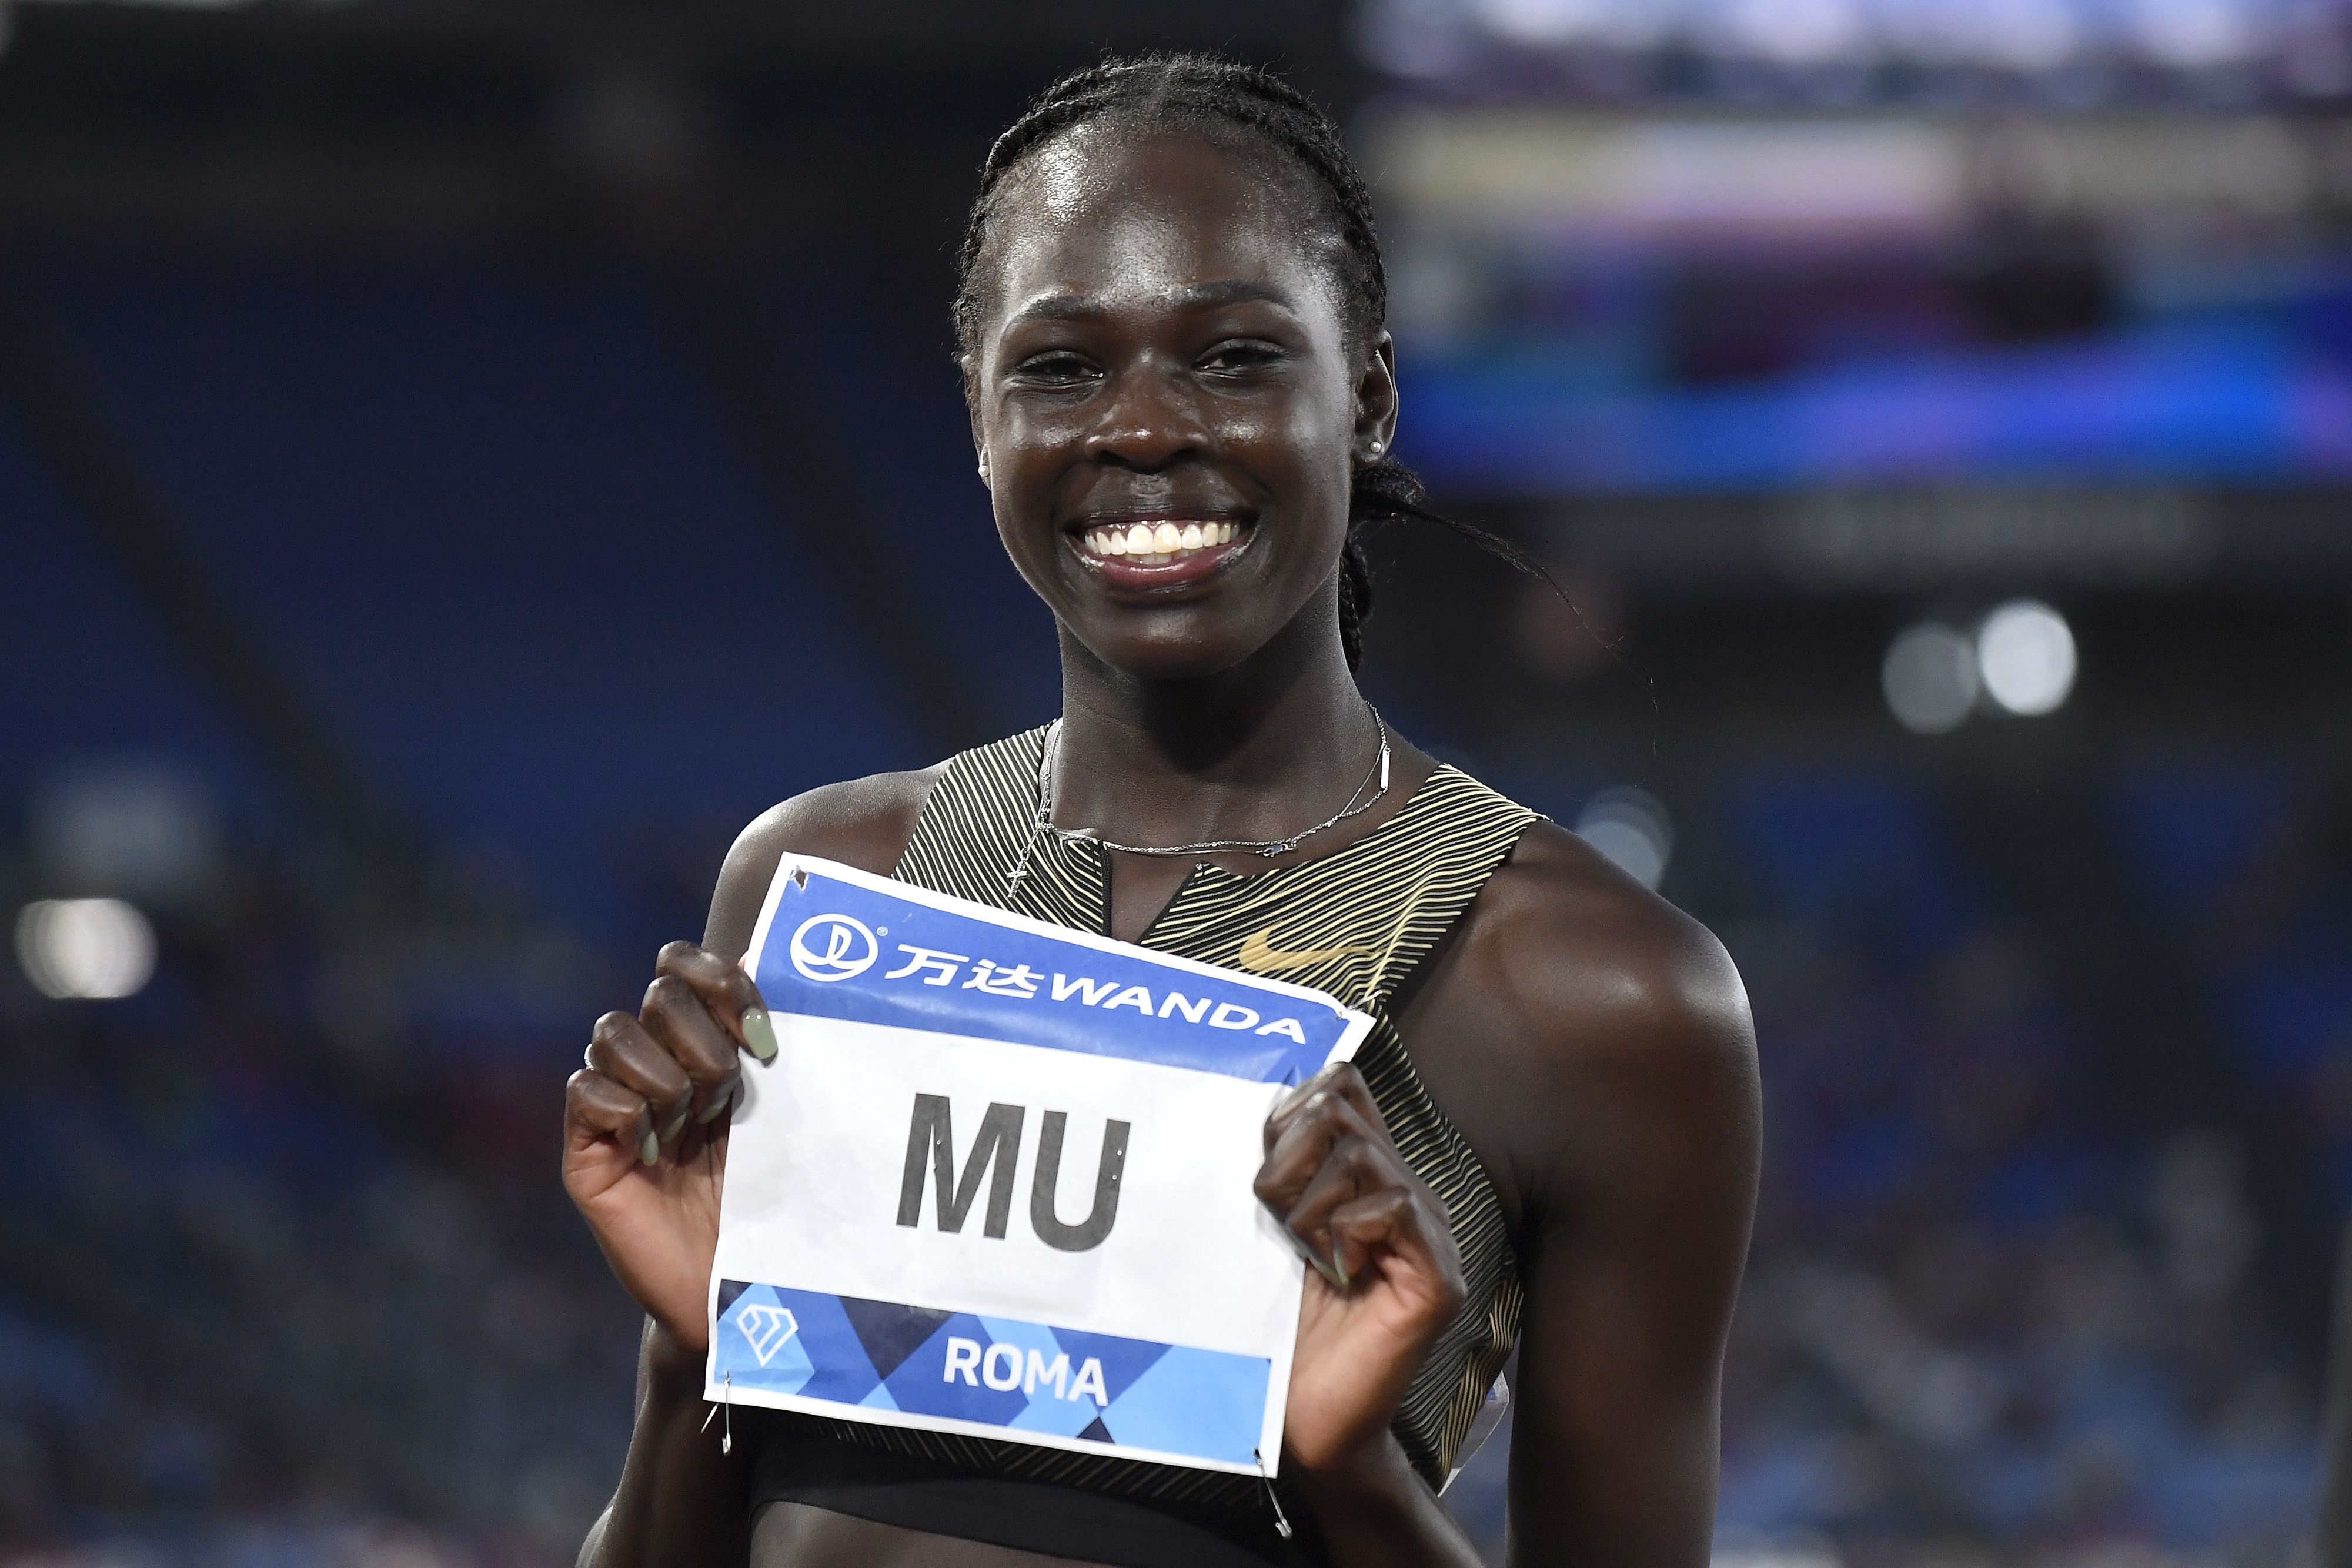 Athing Mu, the 16-year-old who is impressing in athletics 